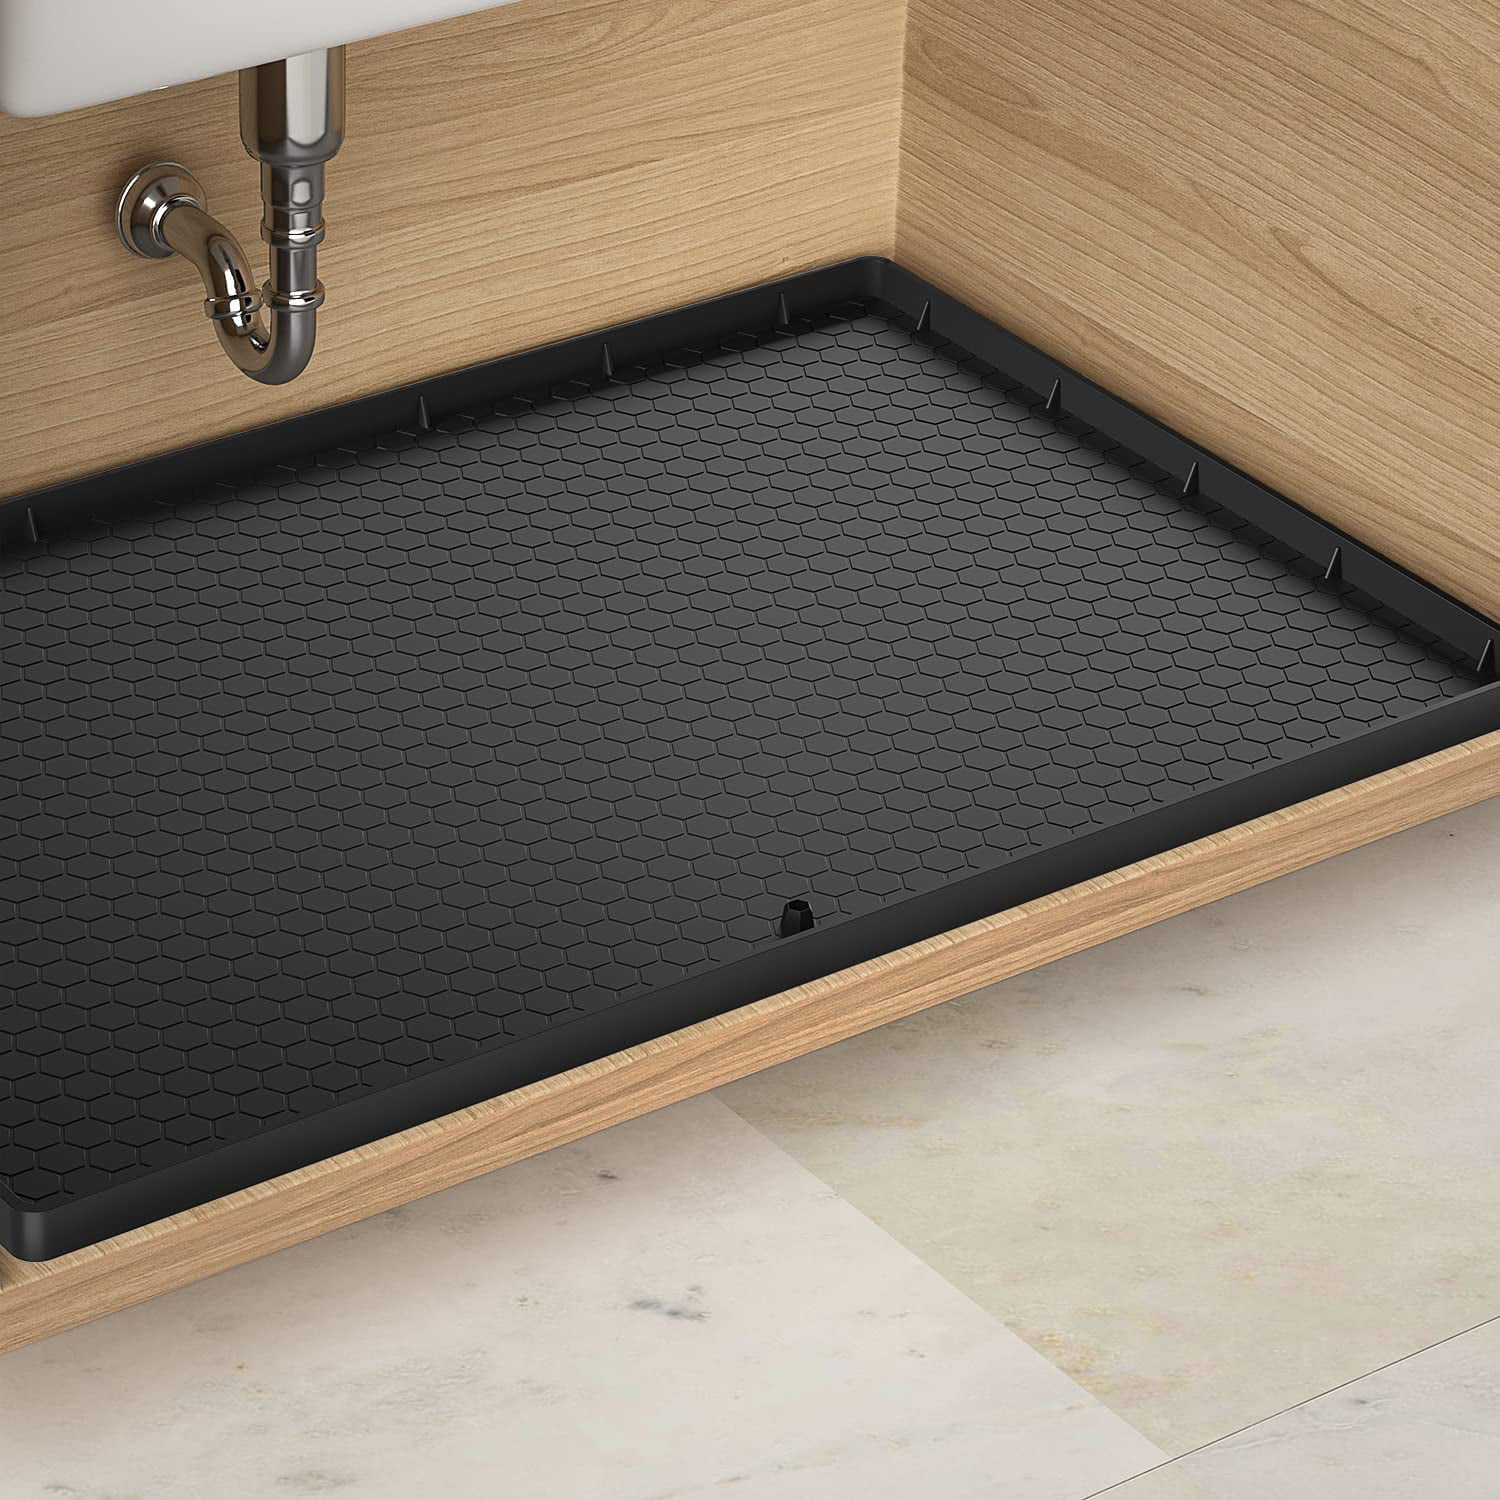 Dropship Silicone Under Sink Mat For Cabinet 34x22in Sink Cabinet Protector  Mat Kitchen Bathroom Cabinet Liner With Drain Hole Hold Up To 3 Callons  Liquid to Sell Online at a Lower Price